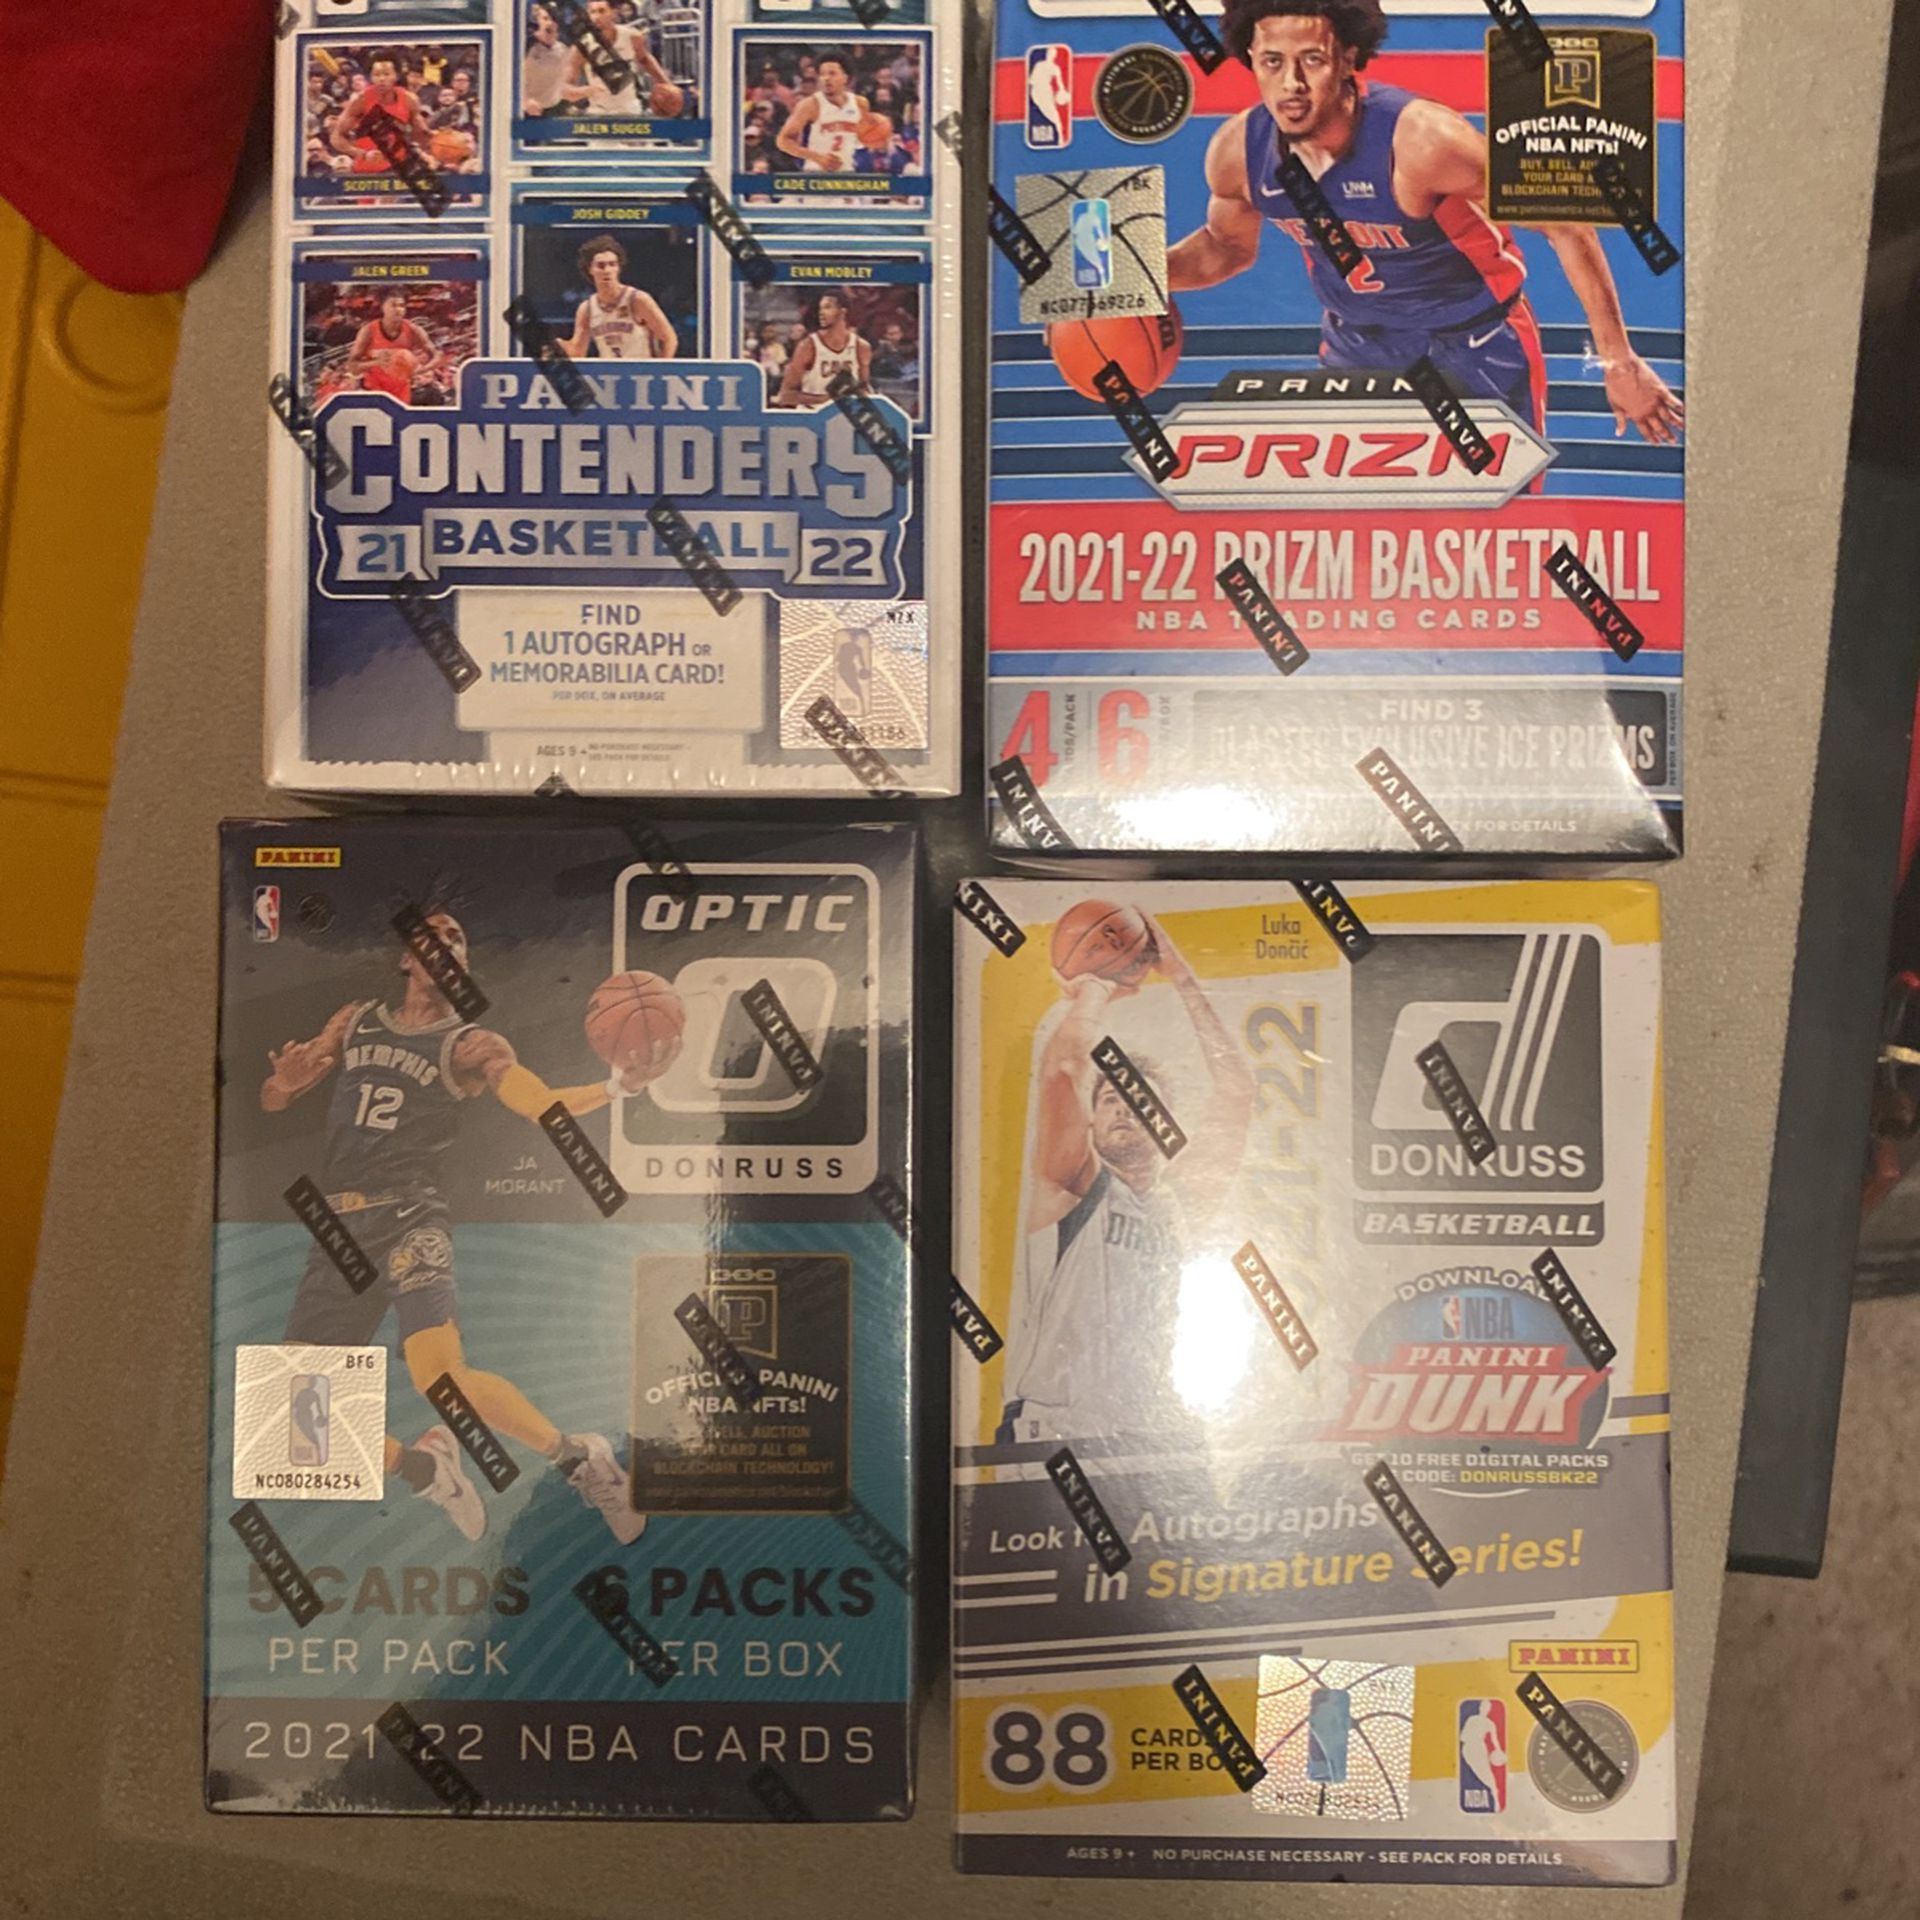 4 Box Lot 2021-22 Basketball Prizm Optic Contender And Donruss Blasters Sealed